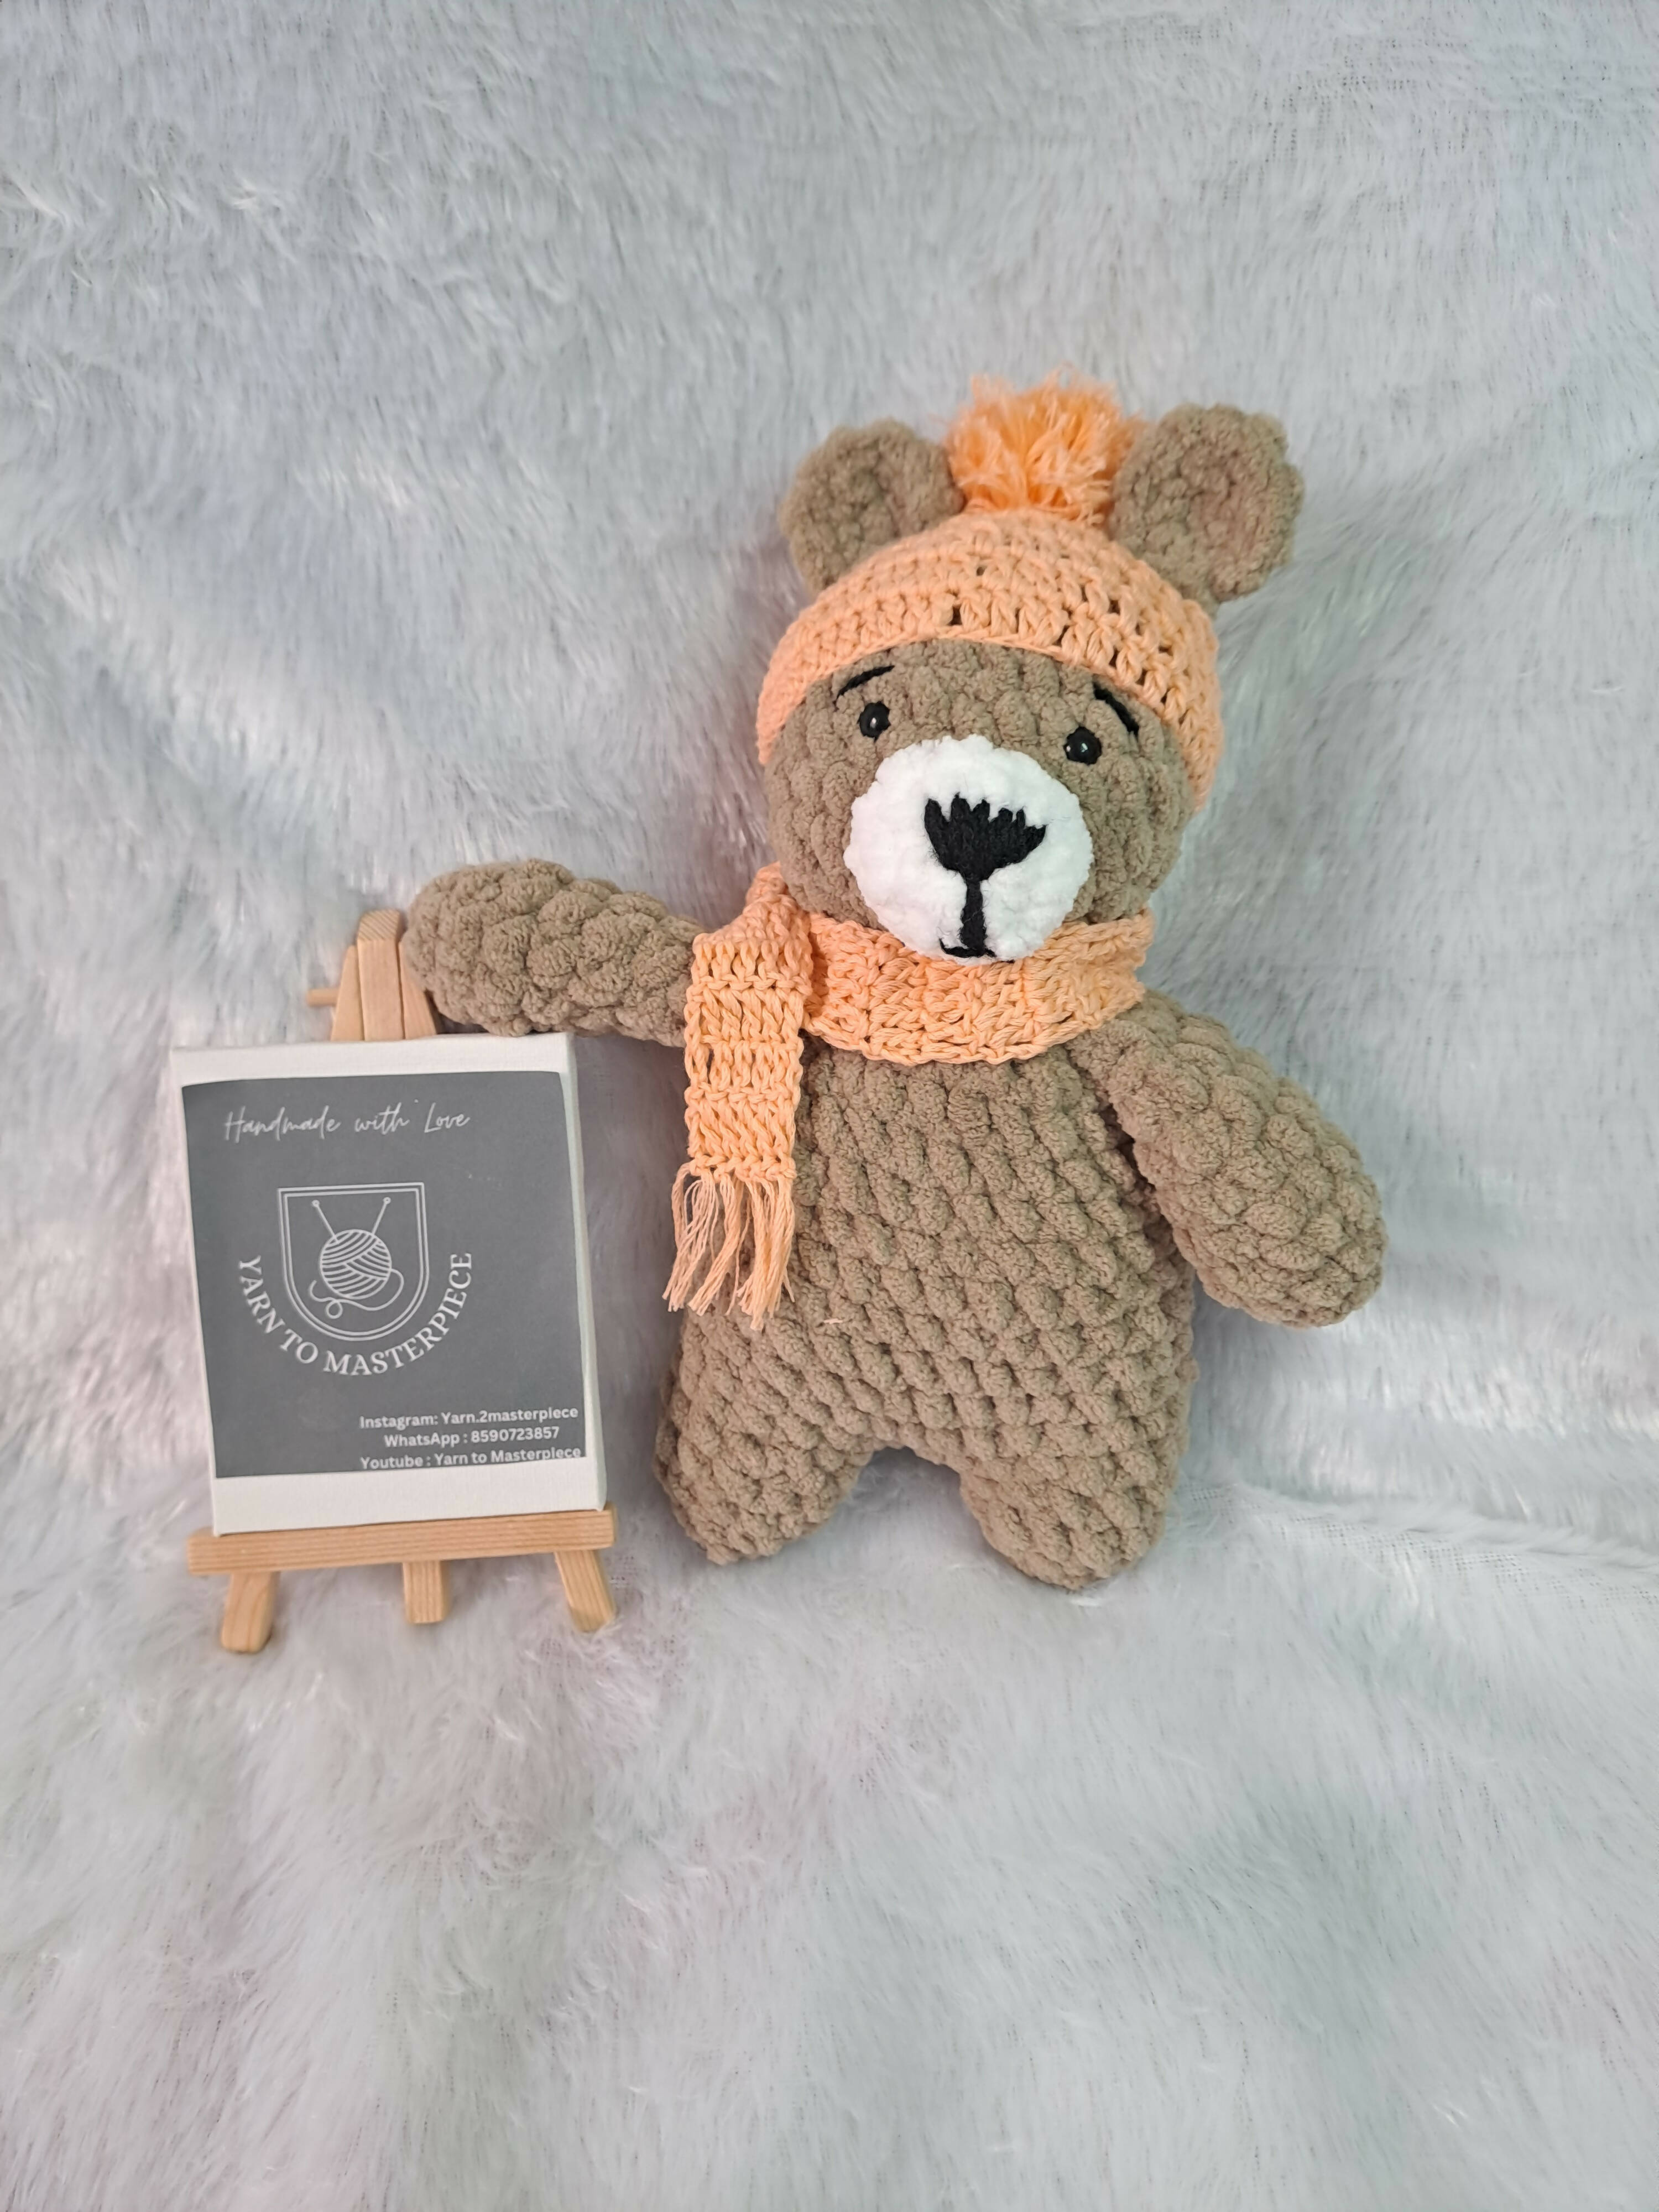 Give the gift of cuddles with the Crochet Plushie Bear—a lovable companion crafted with soft yarn and sweet details, sure to become a cherished favorite.vv